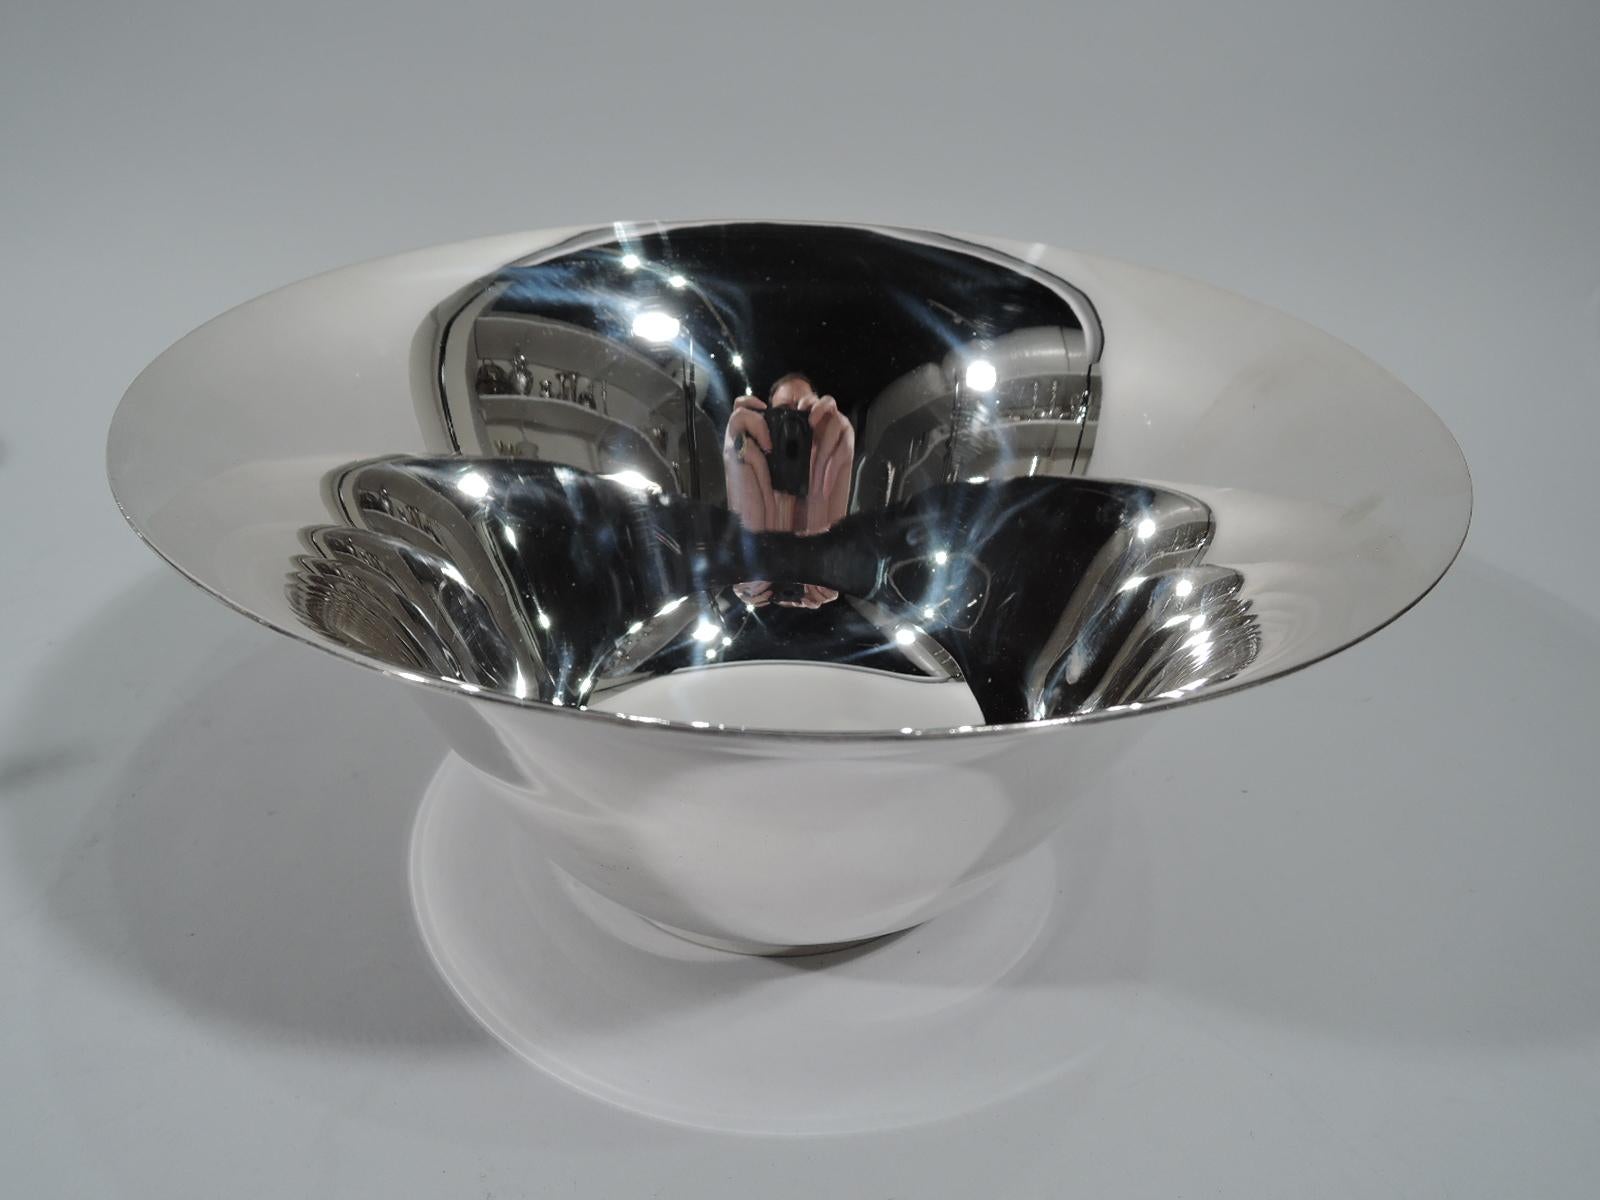 Modern sterling silver bowl. Made by Tiffany & Co. in New York. Tapering sides and flared rim. Short and straight foot. Spare and fluid. Hallmark includes pattern no. 16667F, director’s letter m (1907-1947), and wartime star (1943-1945). Weight: 28